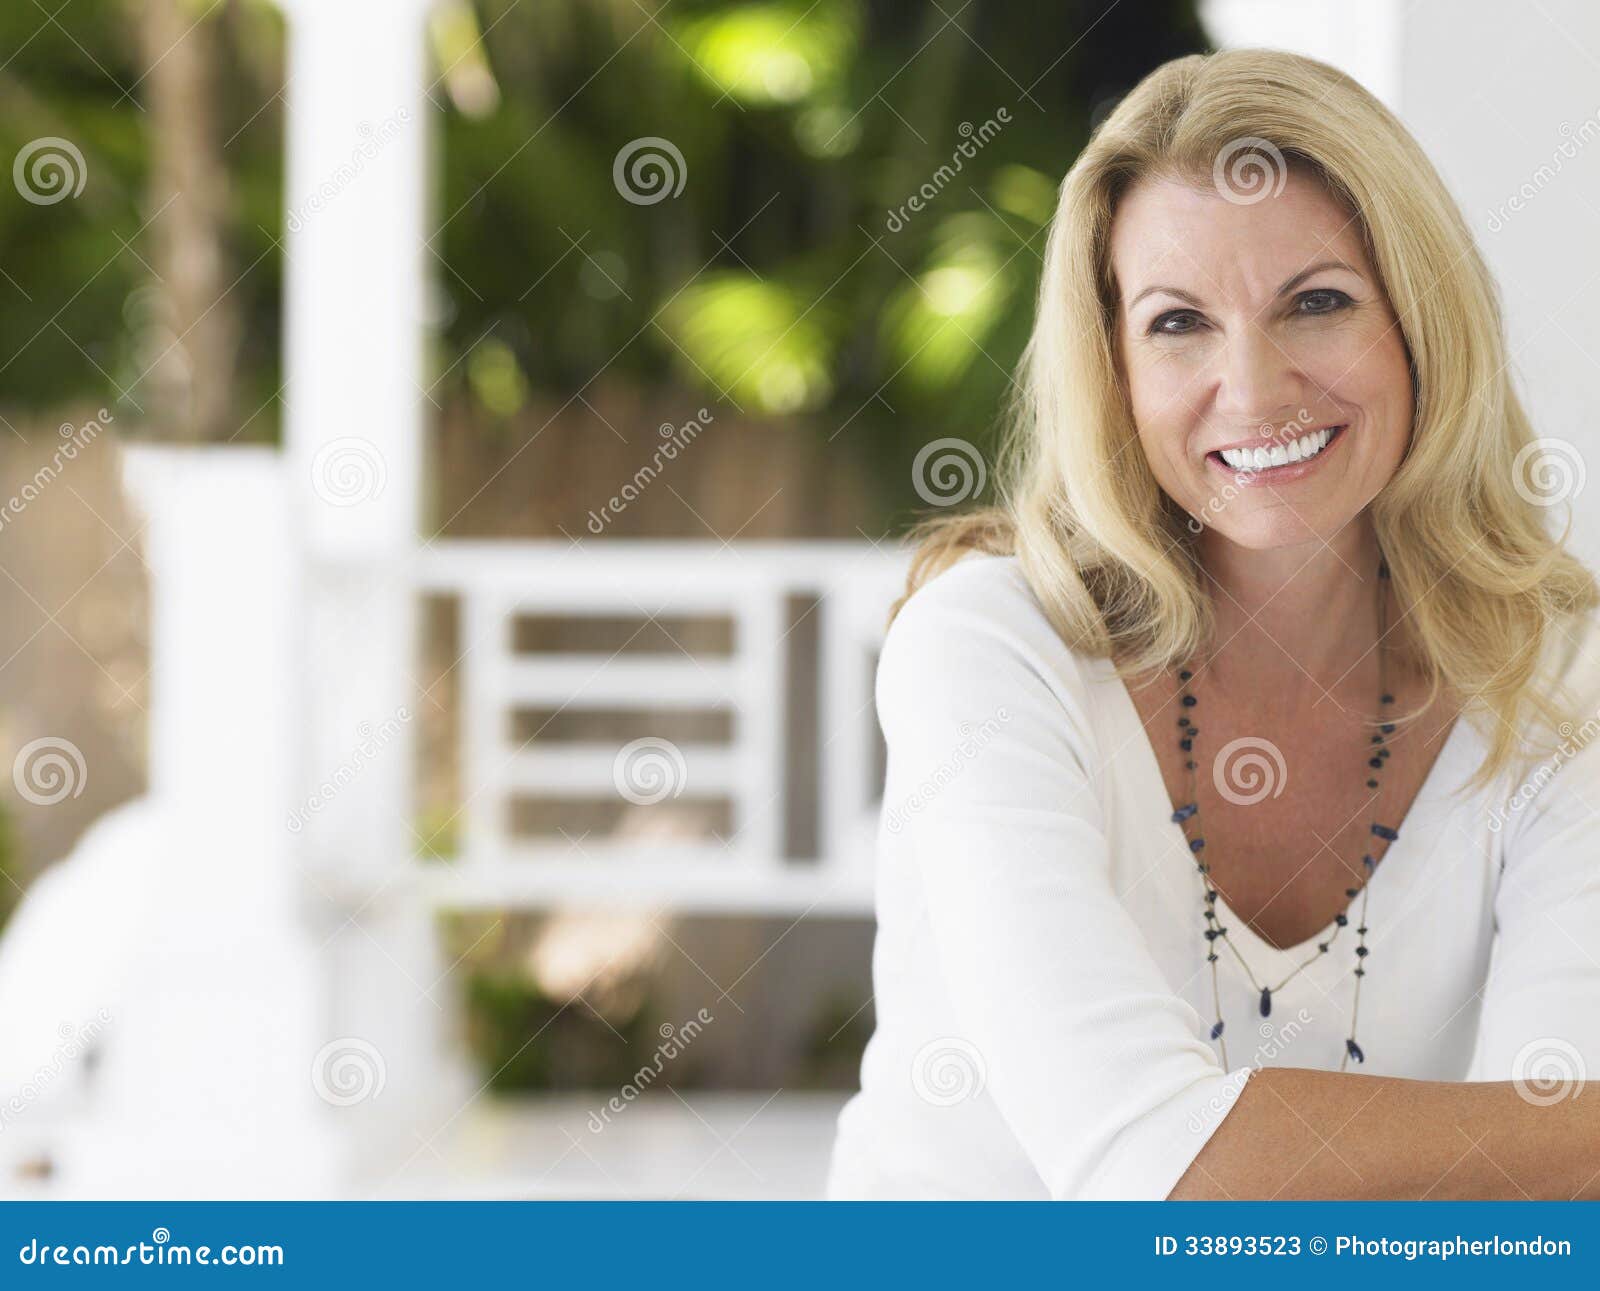 portrait of smiling middle aged woman